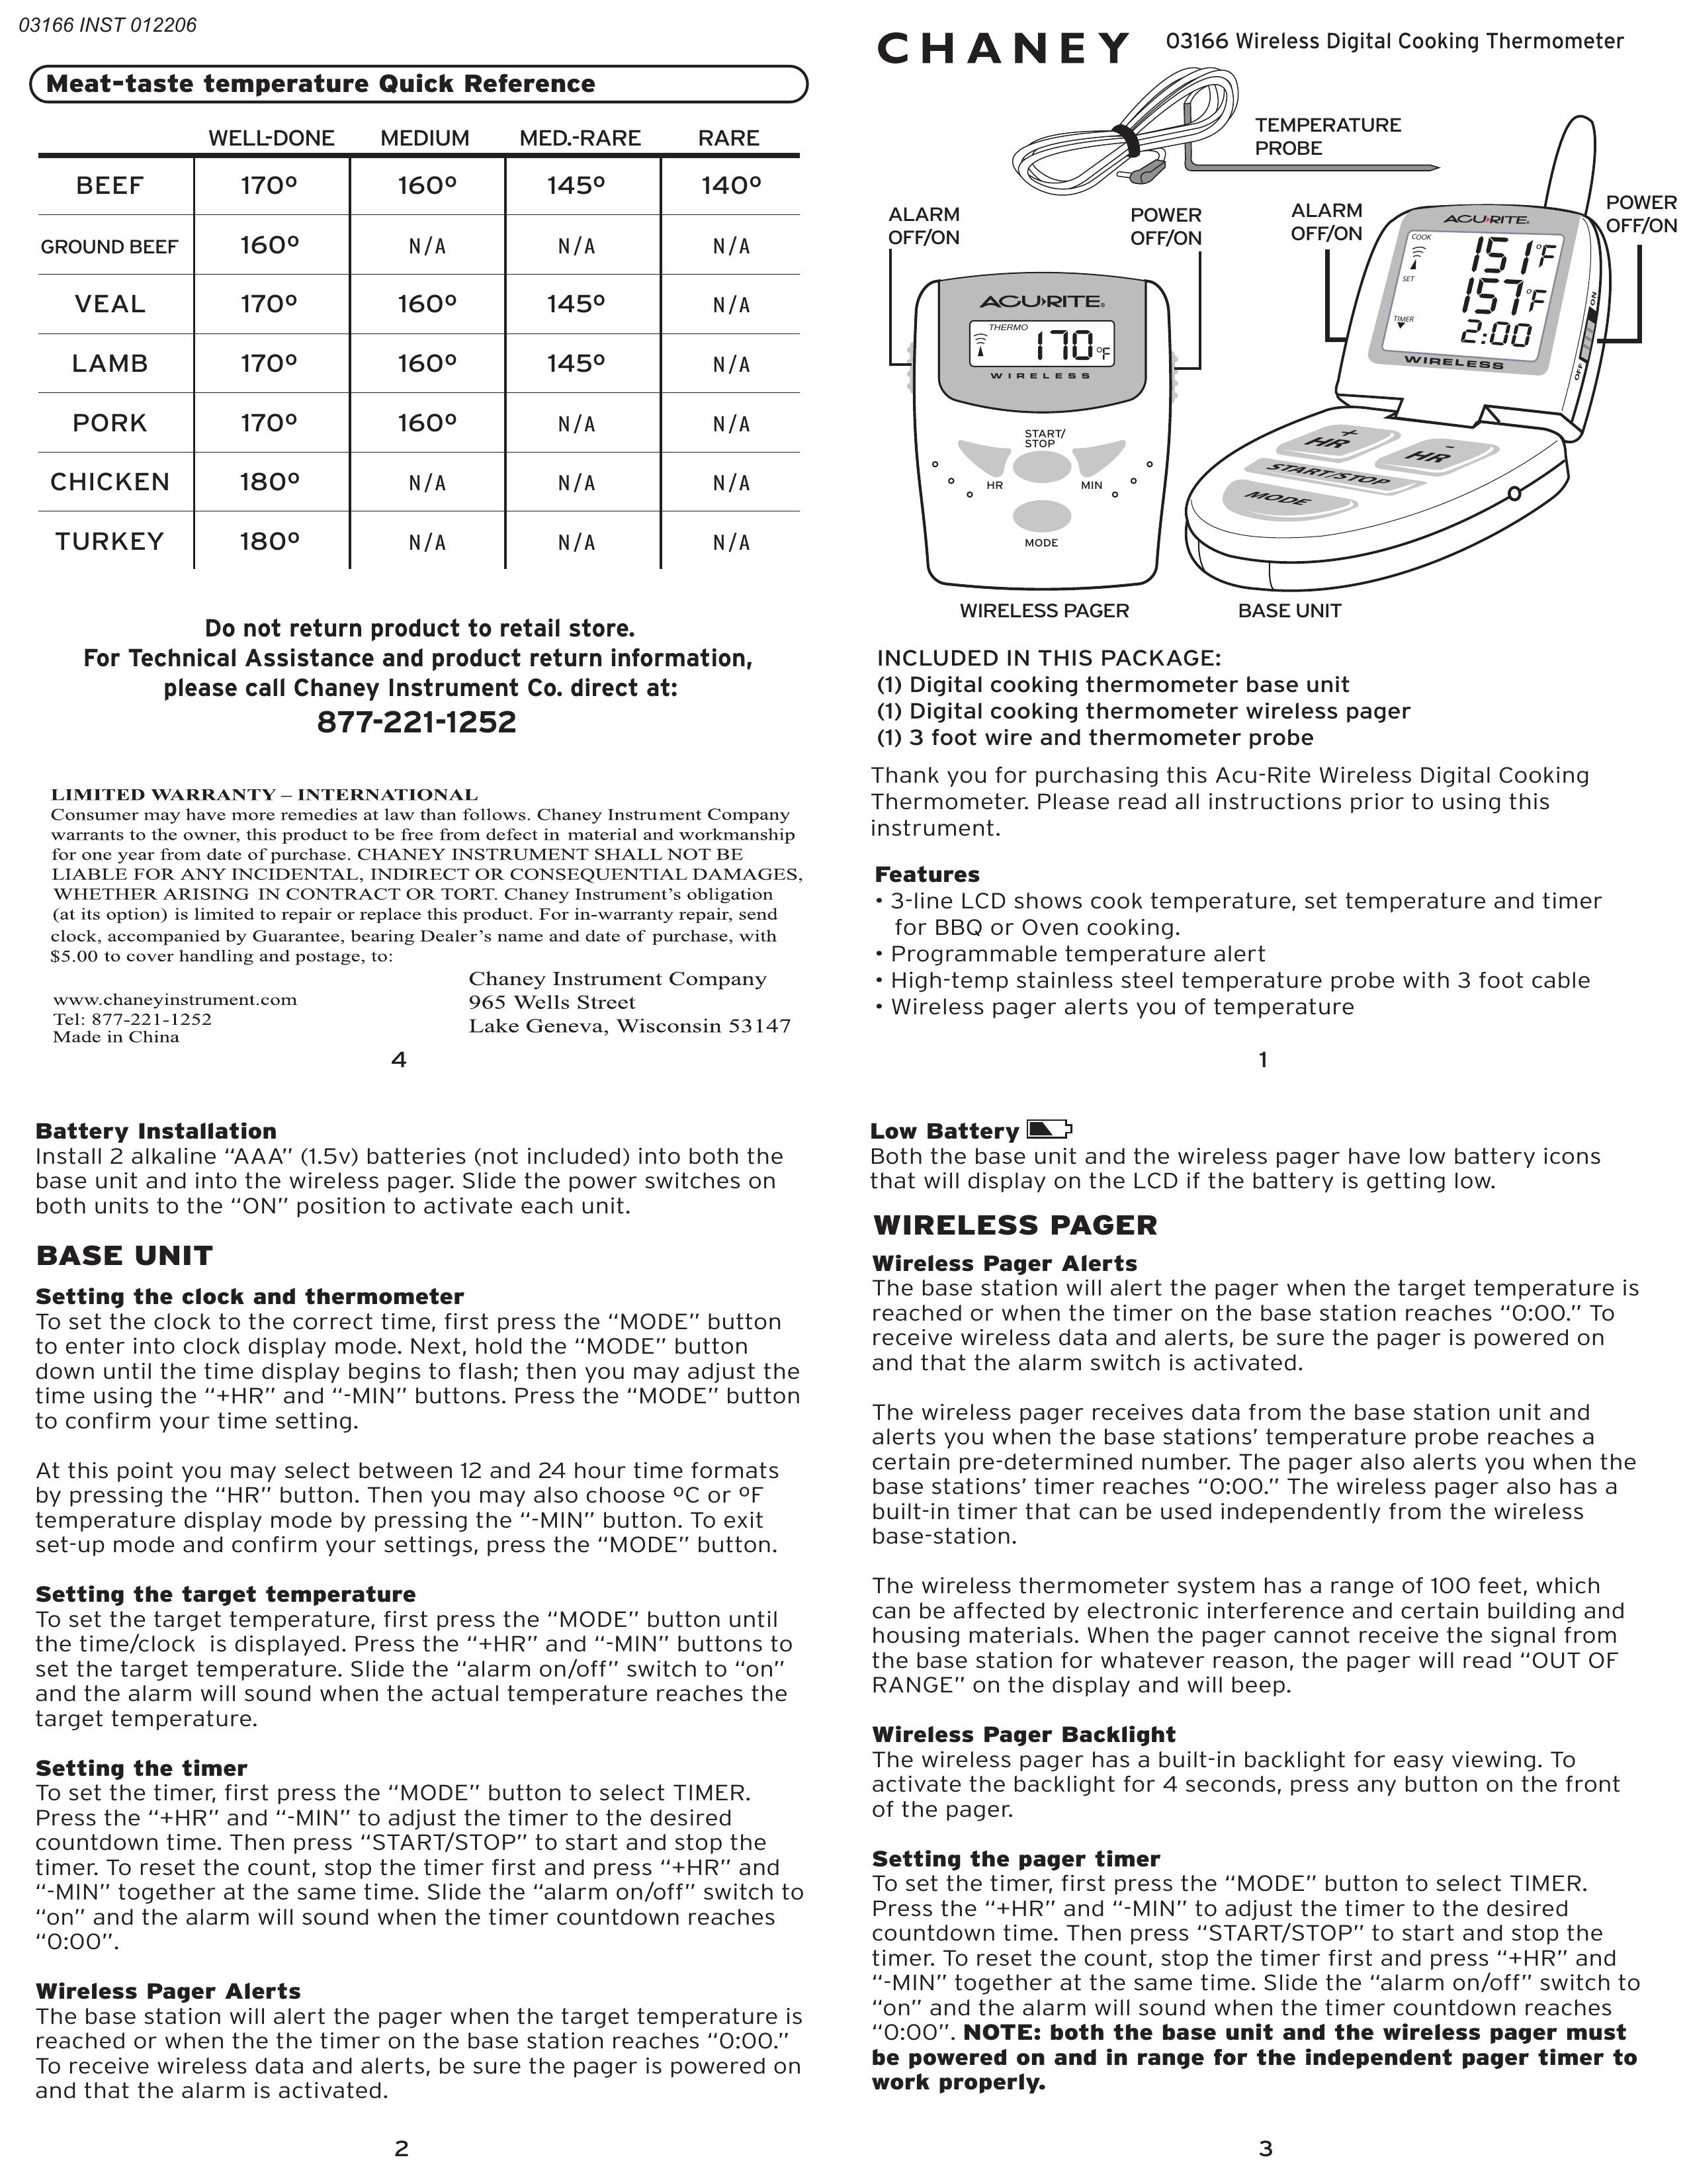 Chaney Instrument 3166 Thermometer User Manual